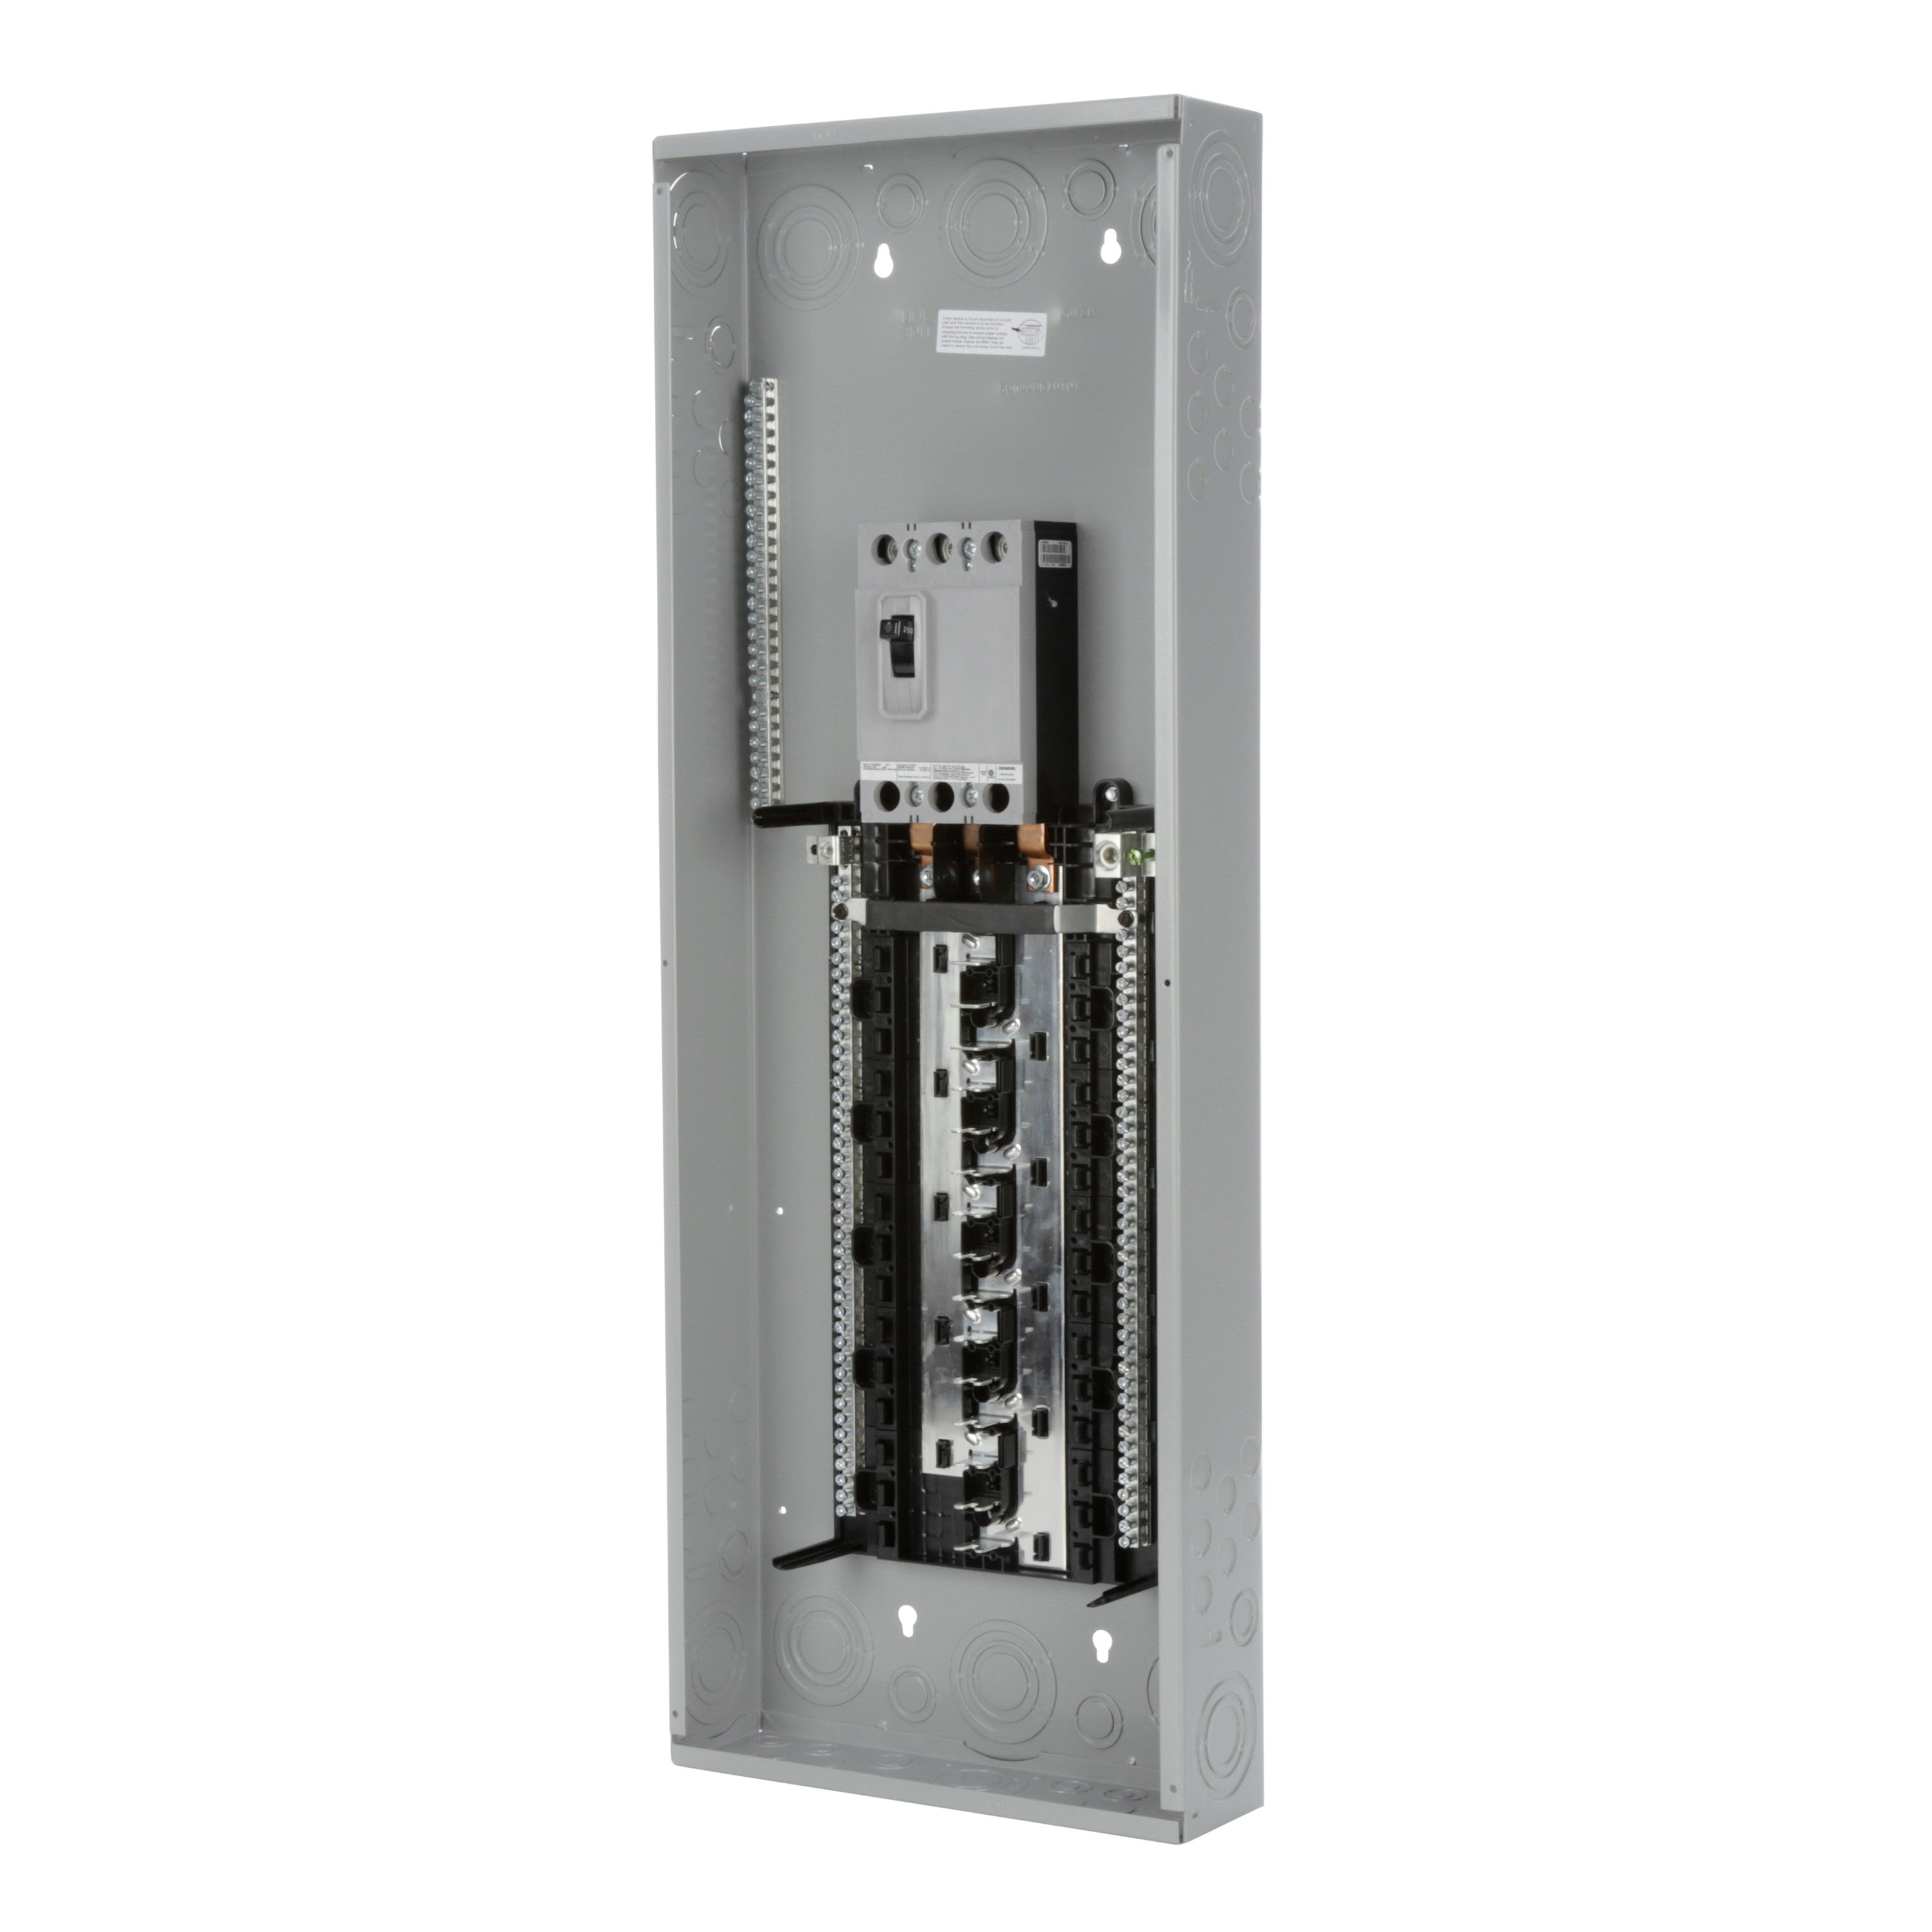 SIEMENS LOW VOLTAGE PL SERIES LOAD CENTER. FACTORY INSTALLED MAIN BREAKER WITH 30 1-INCH SPACES ALLOWING MAX 54 CIRCUITS. 3-PHASE 4-WIRE SYSTEM RATED 120/240V OR 120/208V (200A) 22KA INTERRUPT. SPECIAL FEATURES COPPER BUS, INTERCHANGEABLE MAIN, GRAY TRIM, NEMA TYPE1 ENCLOSURE FOR INDOOR USE.